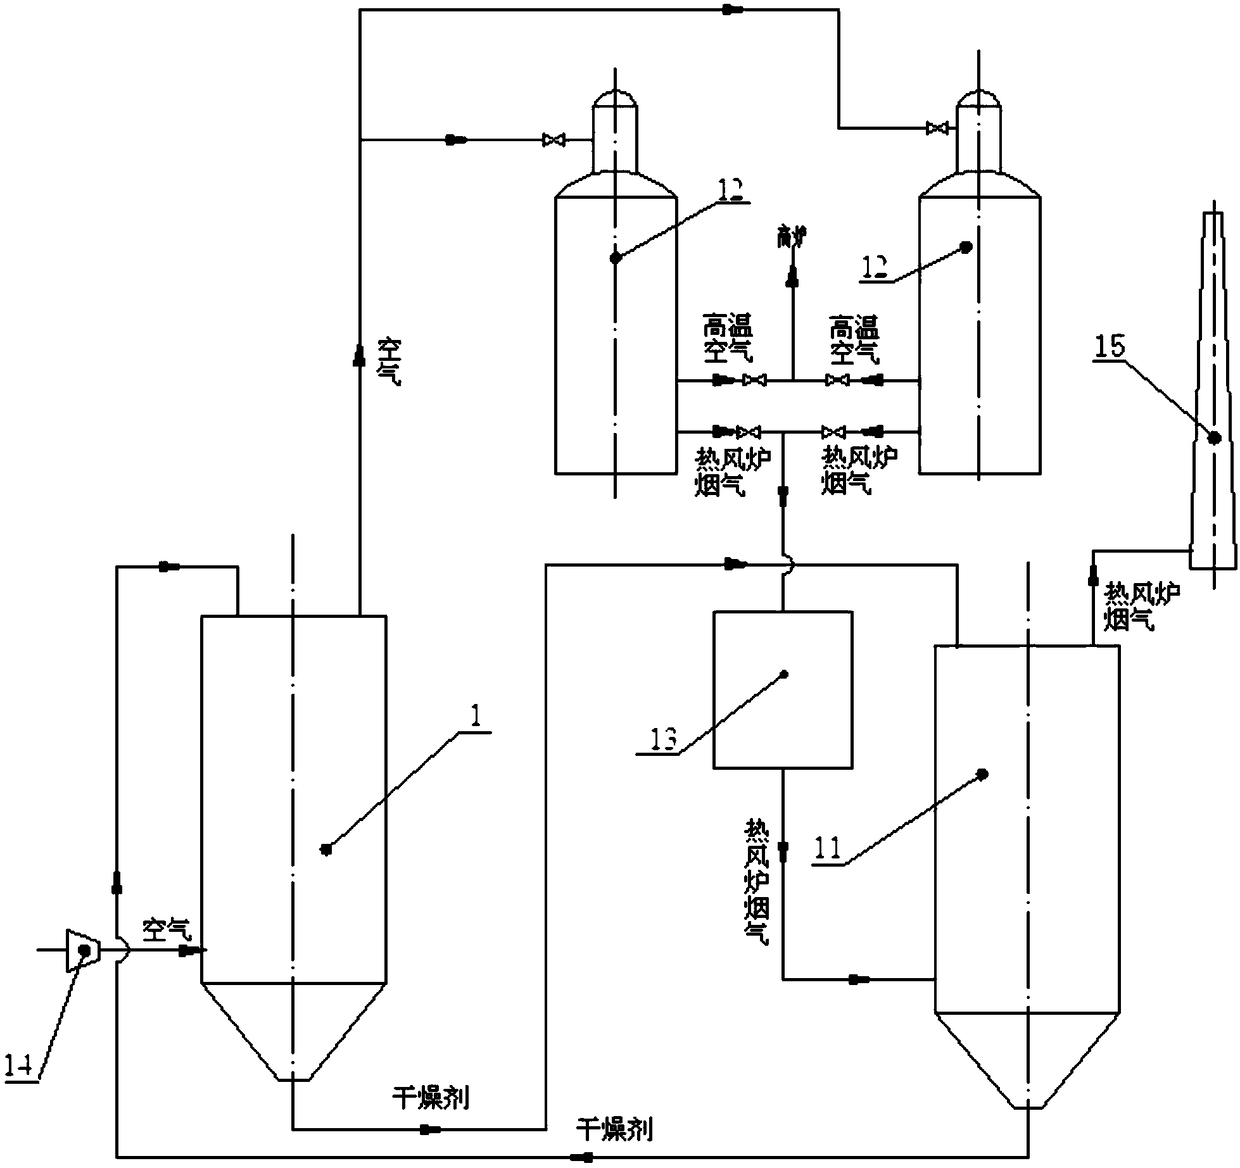 The process system of using the waste heat of hot blast stove flue gas for blast dehumidification